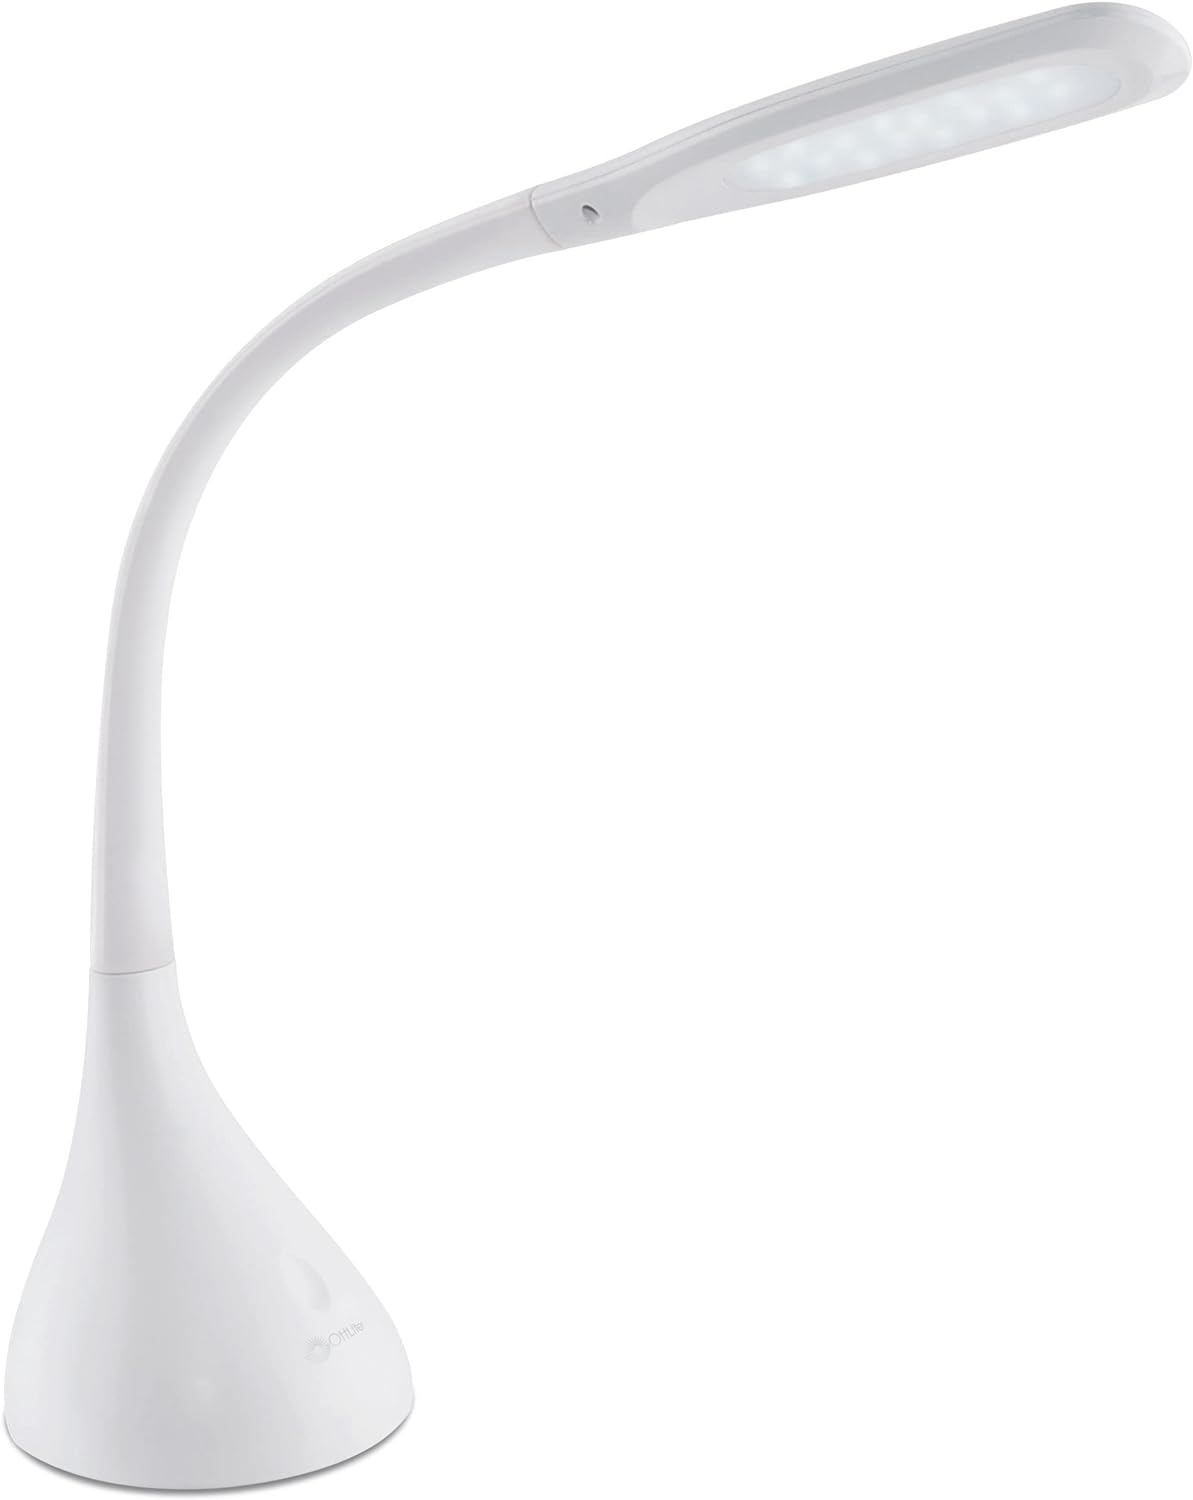 OttLite Creative Curves LED Desk Lamp with Adjustable Neck - Dimmable with 4 Brightness Settings